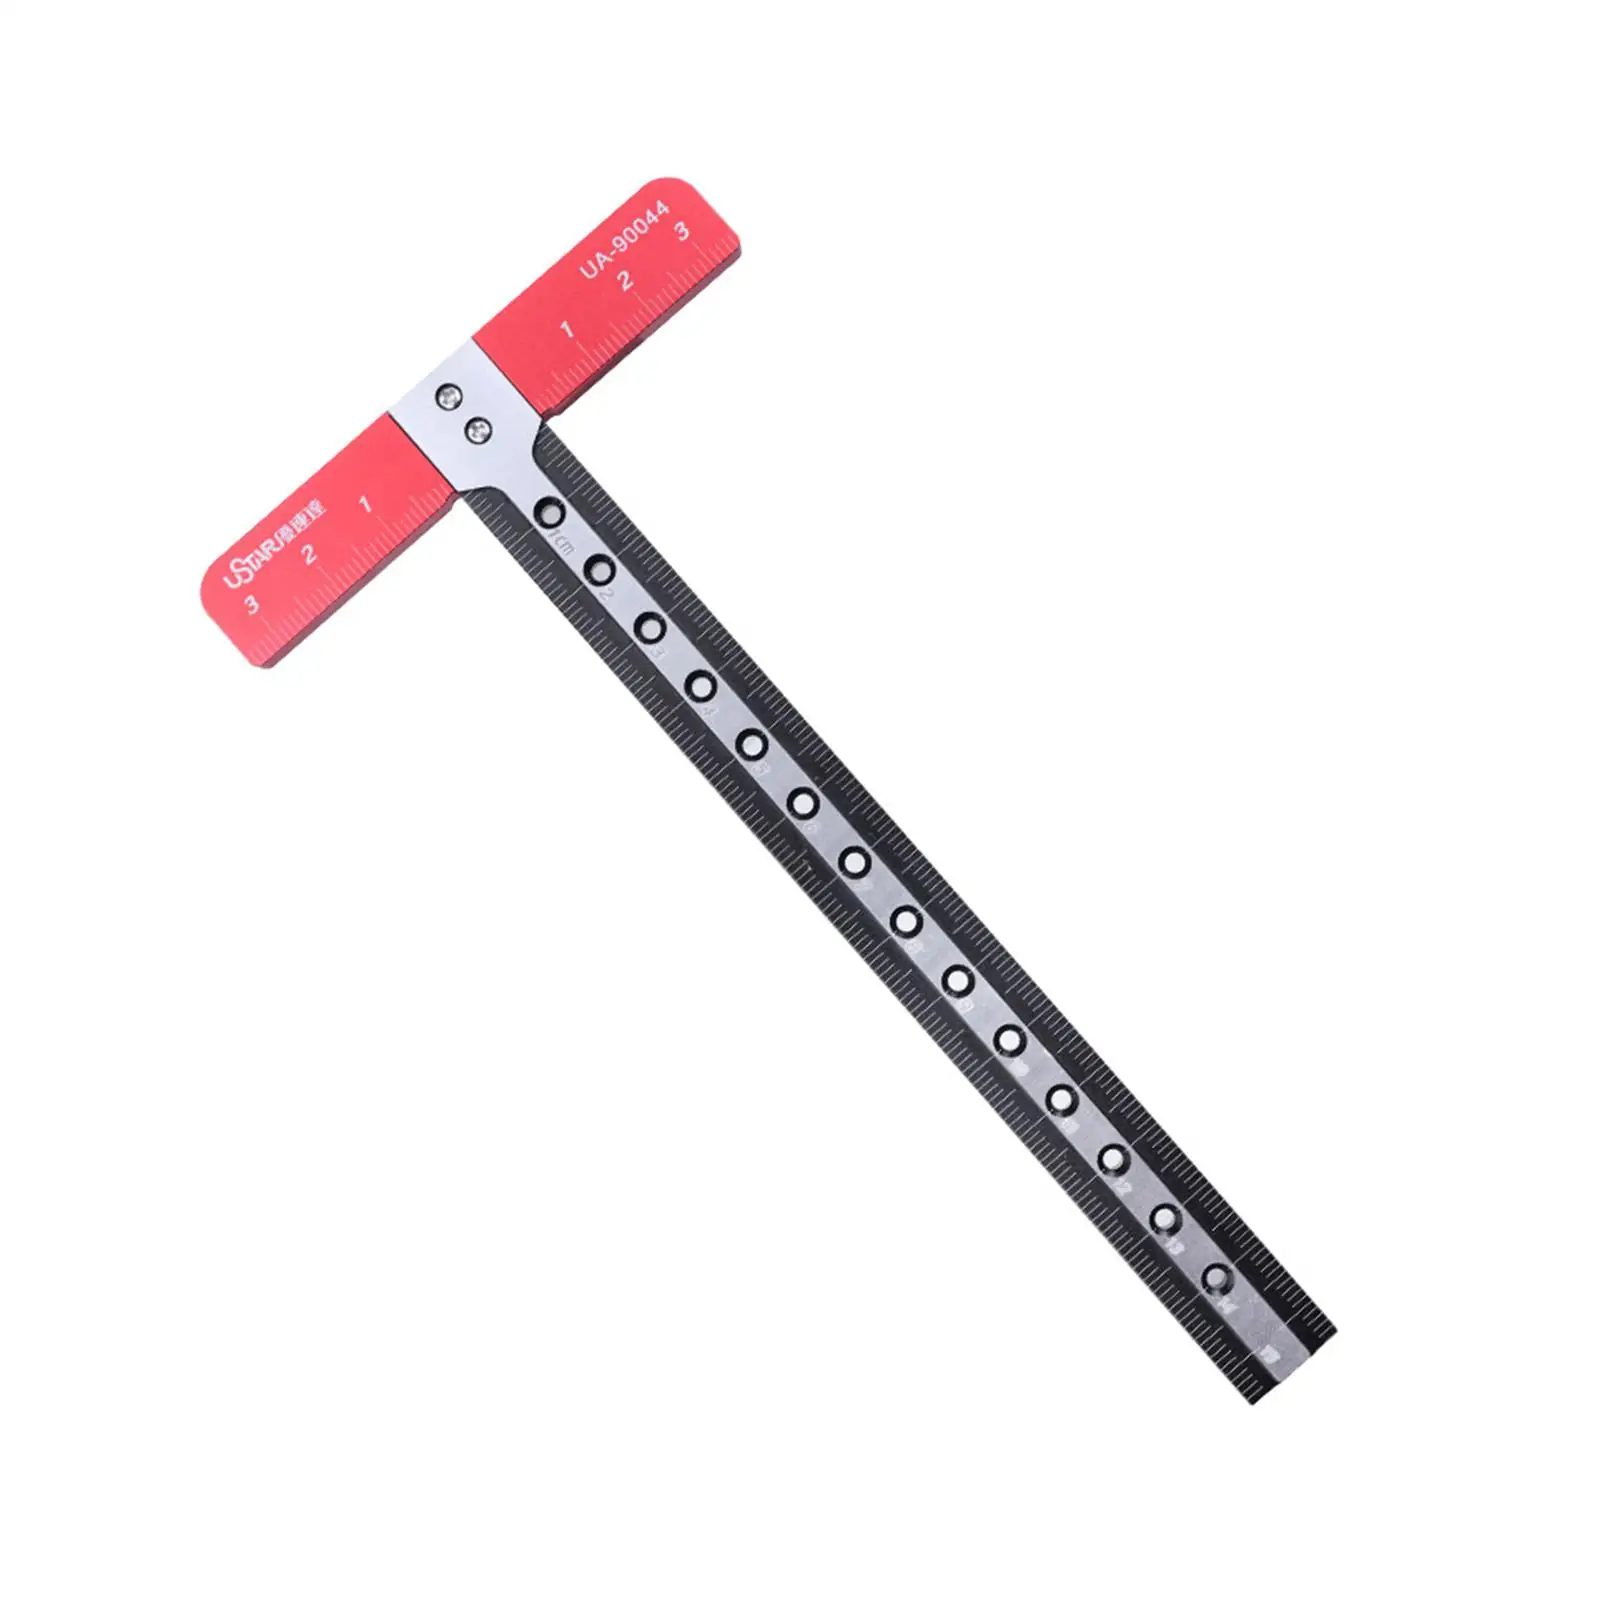 T Square Ruler Shape Positioning Ruler Aluminum Alloy Precise Angle -90044 for Drafting Tools Model Making Tools Hobby DIY